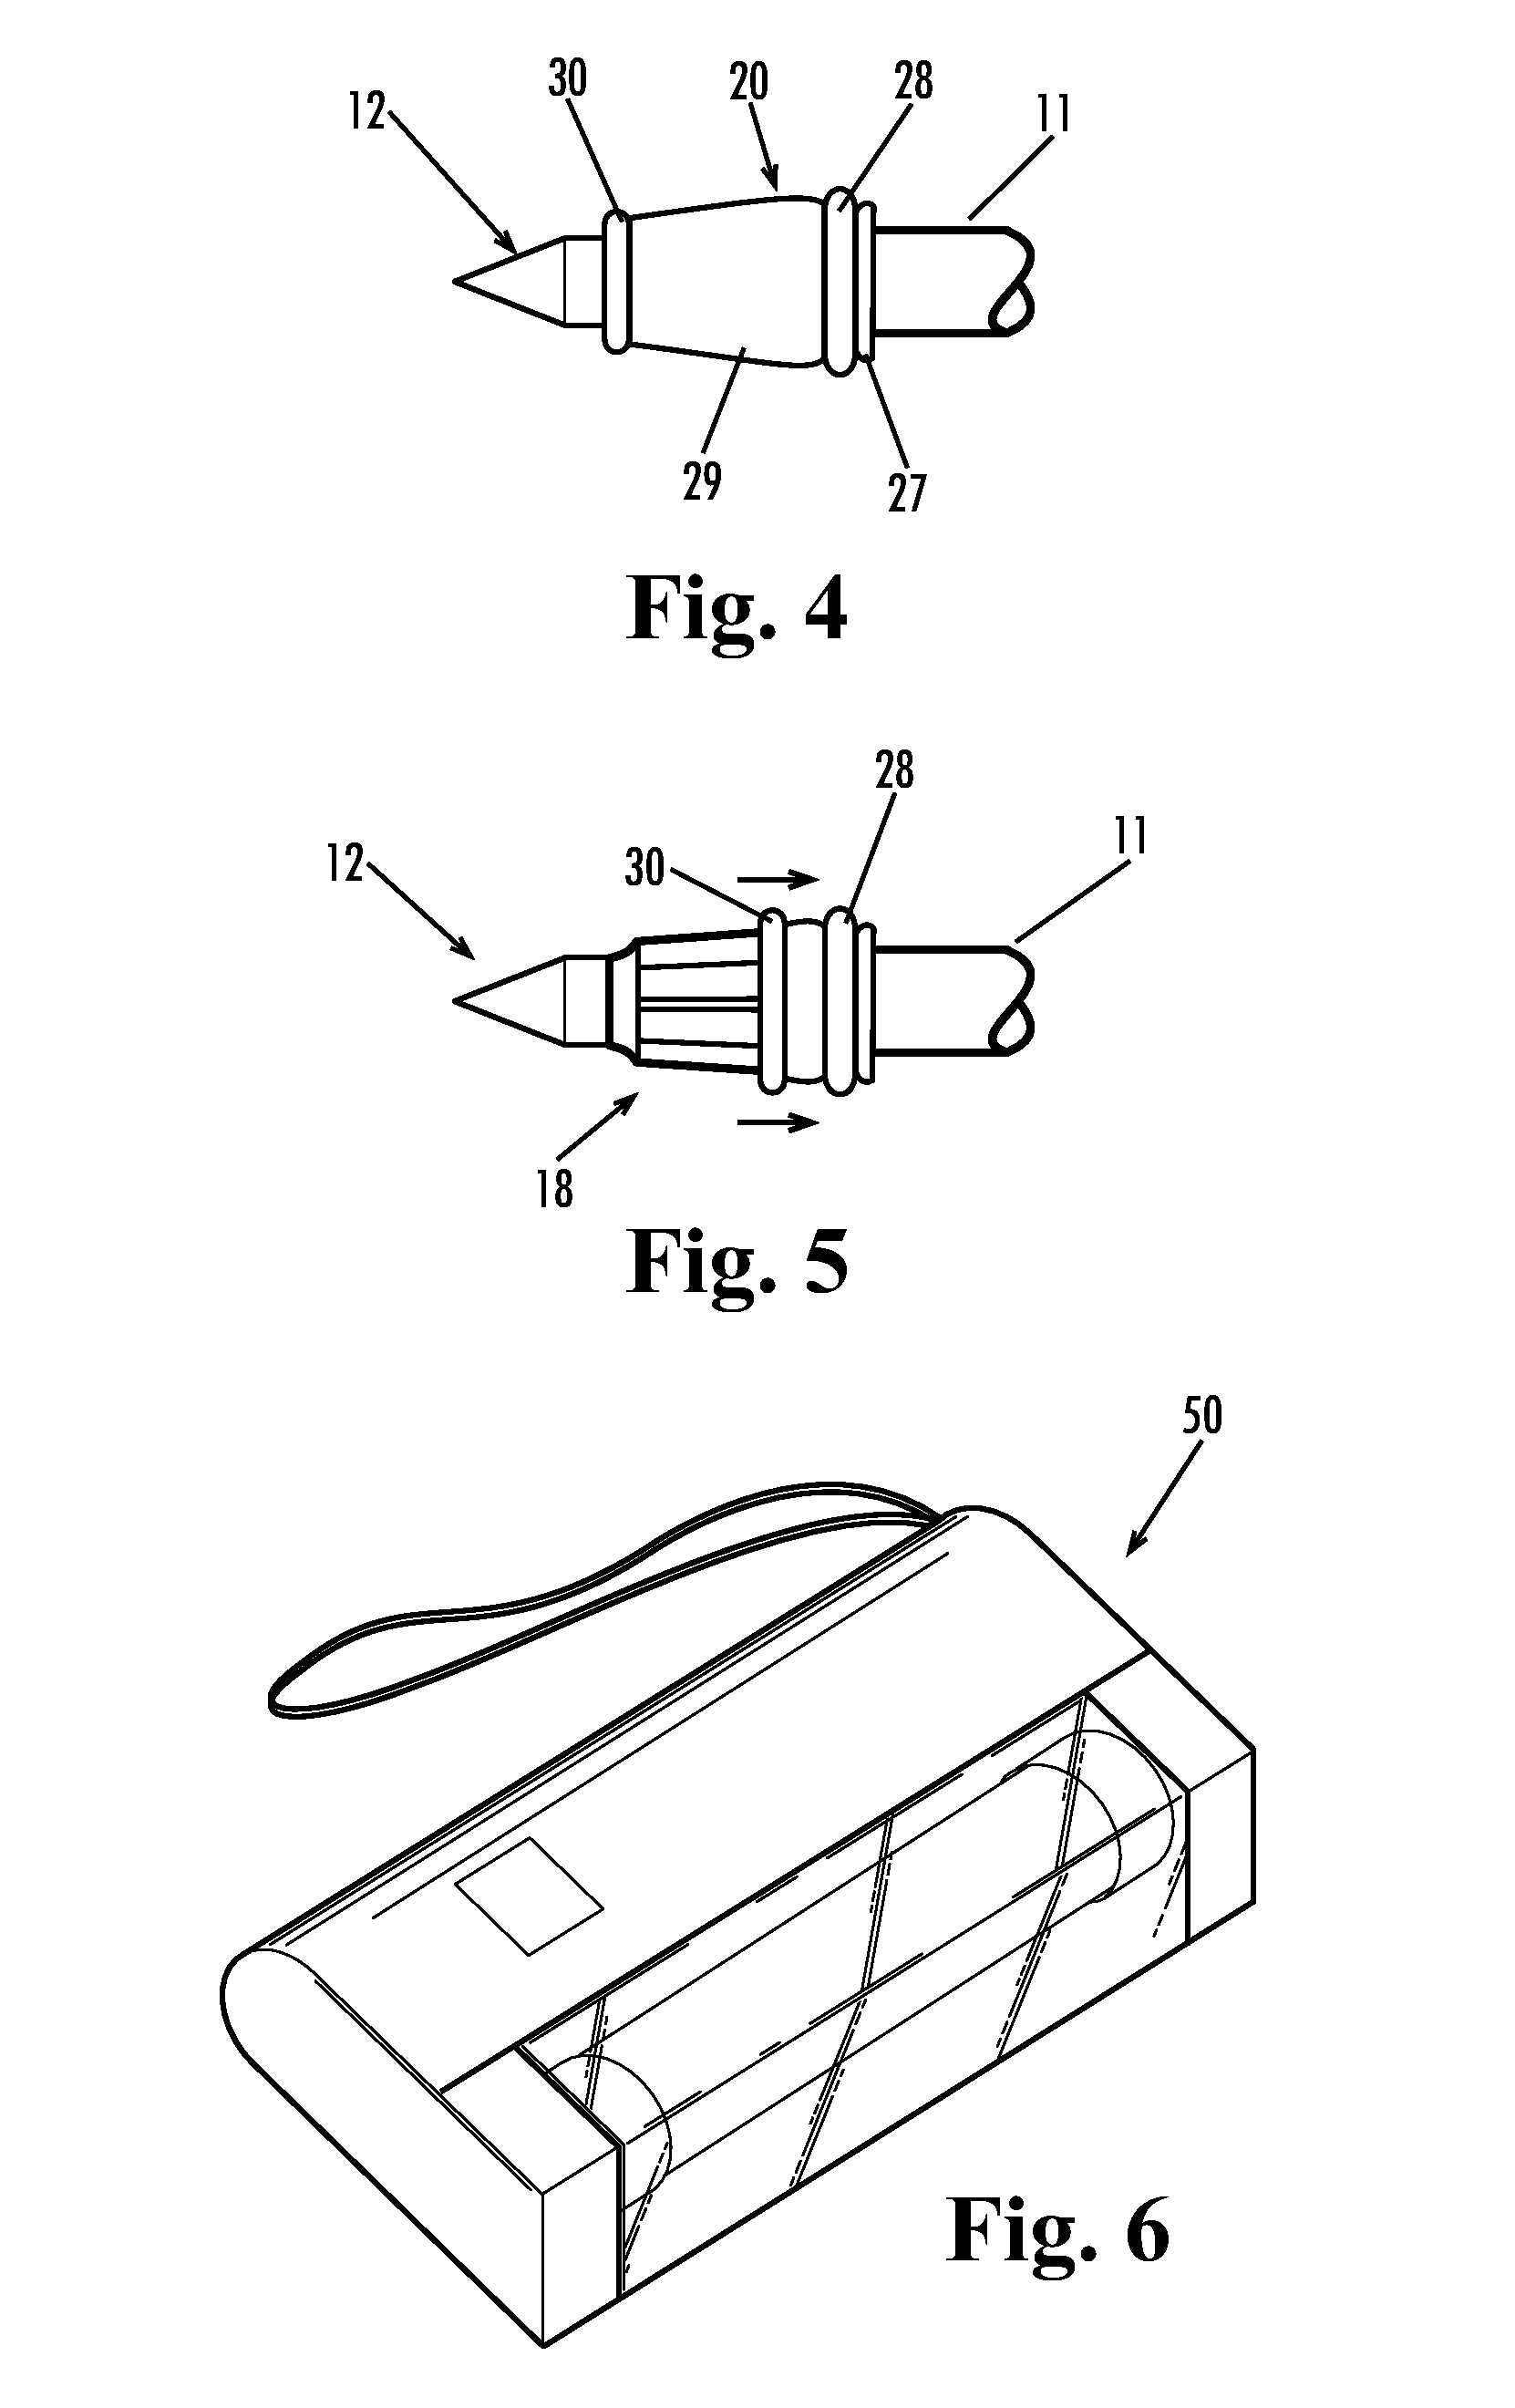 Bowhunting device and method for tracking wounded prey